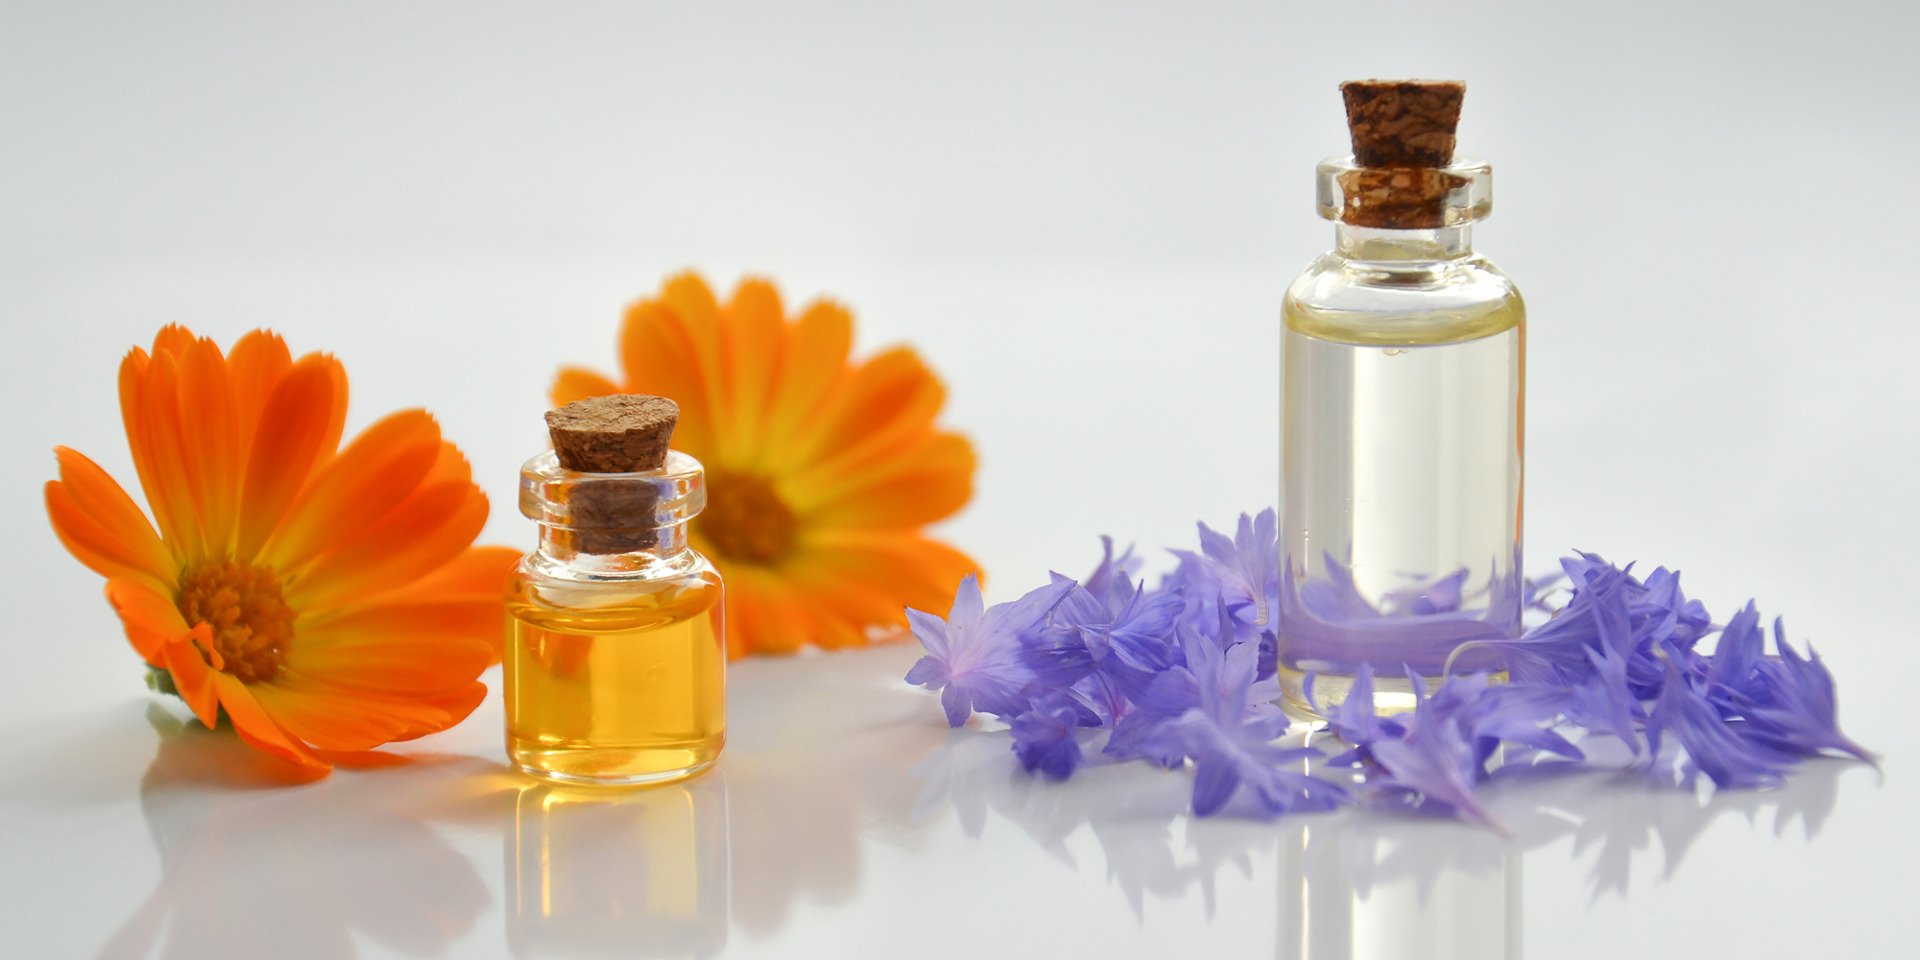 Revive therapies Bach flower remedies